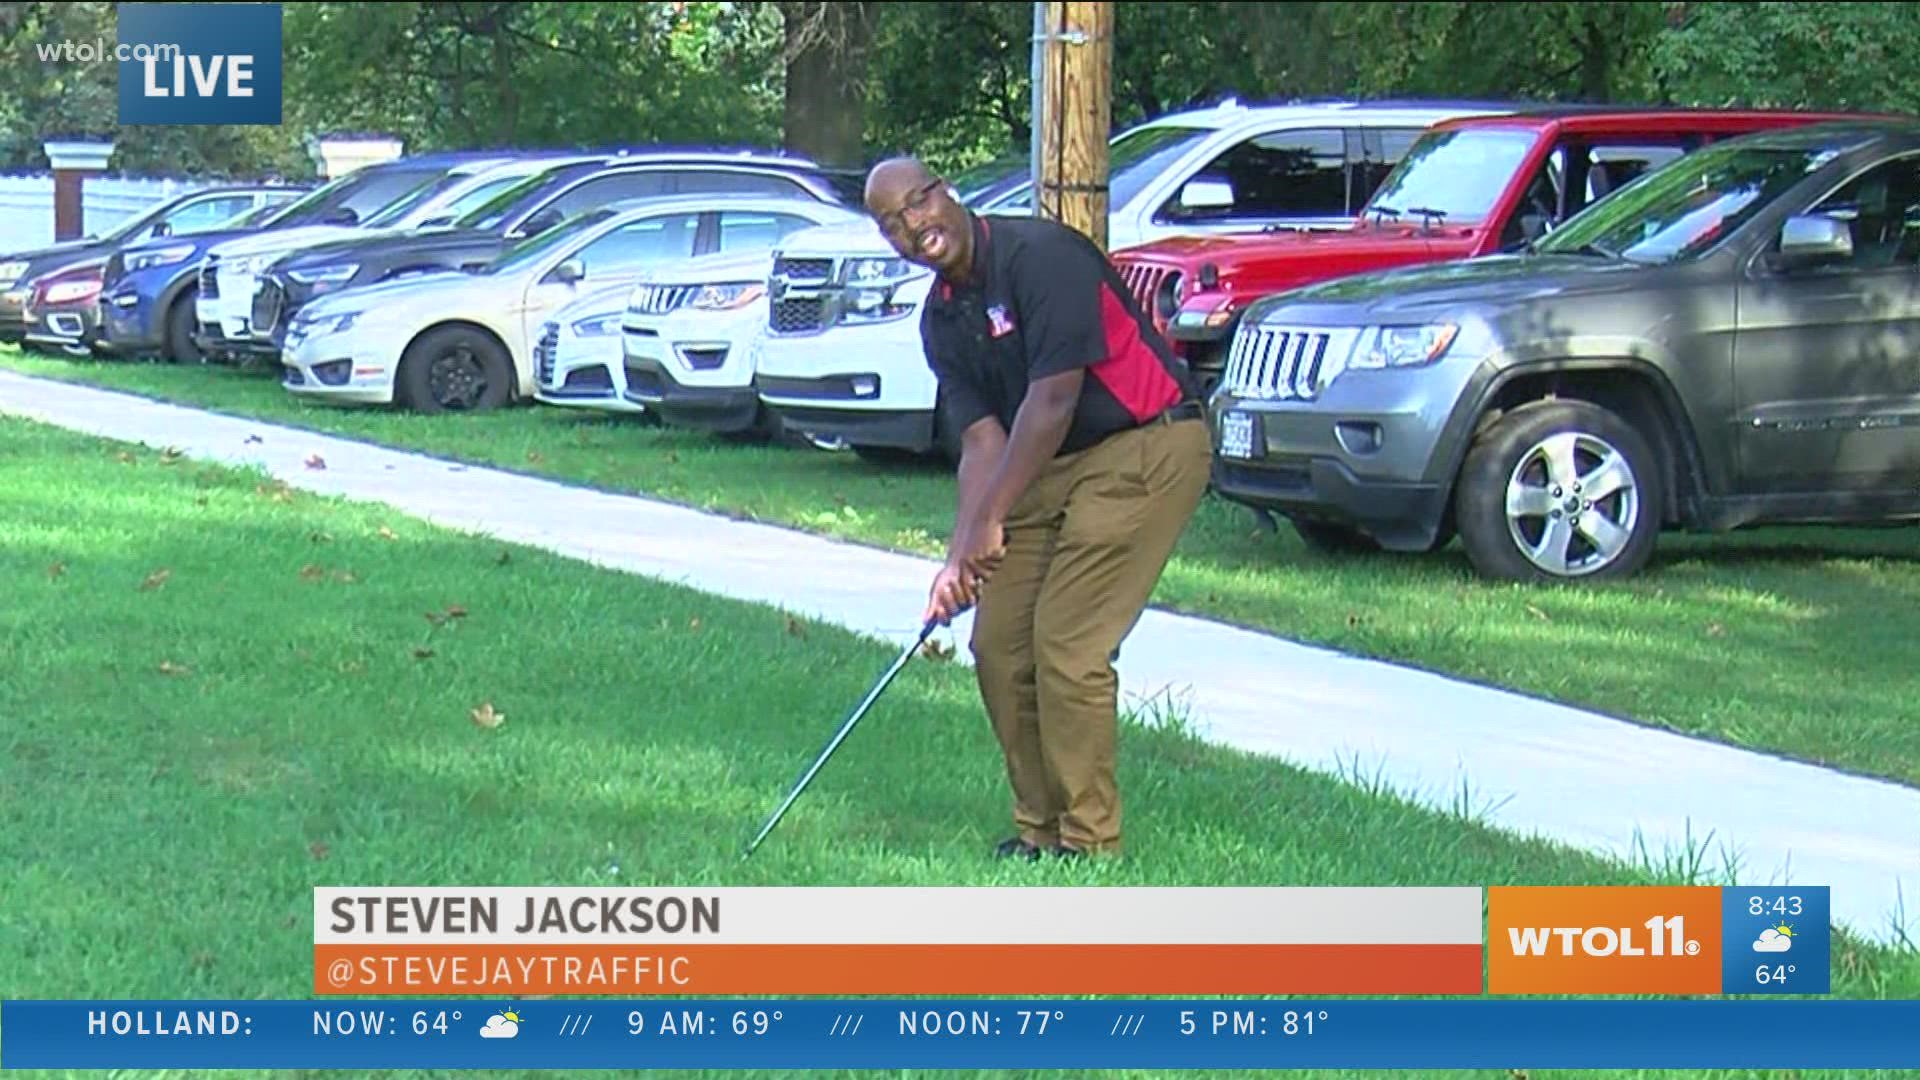 Can you fill in the blank? Our Steven Jackson has both the trivia and the golf game down pat!